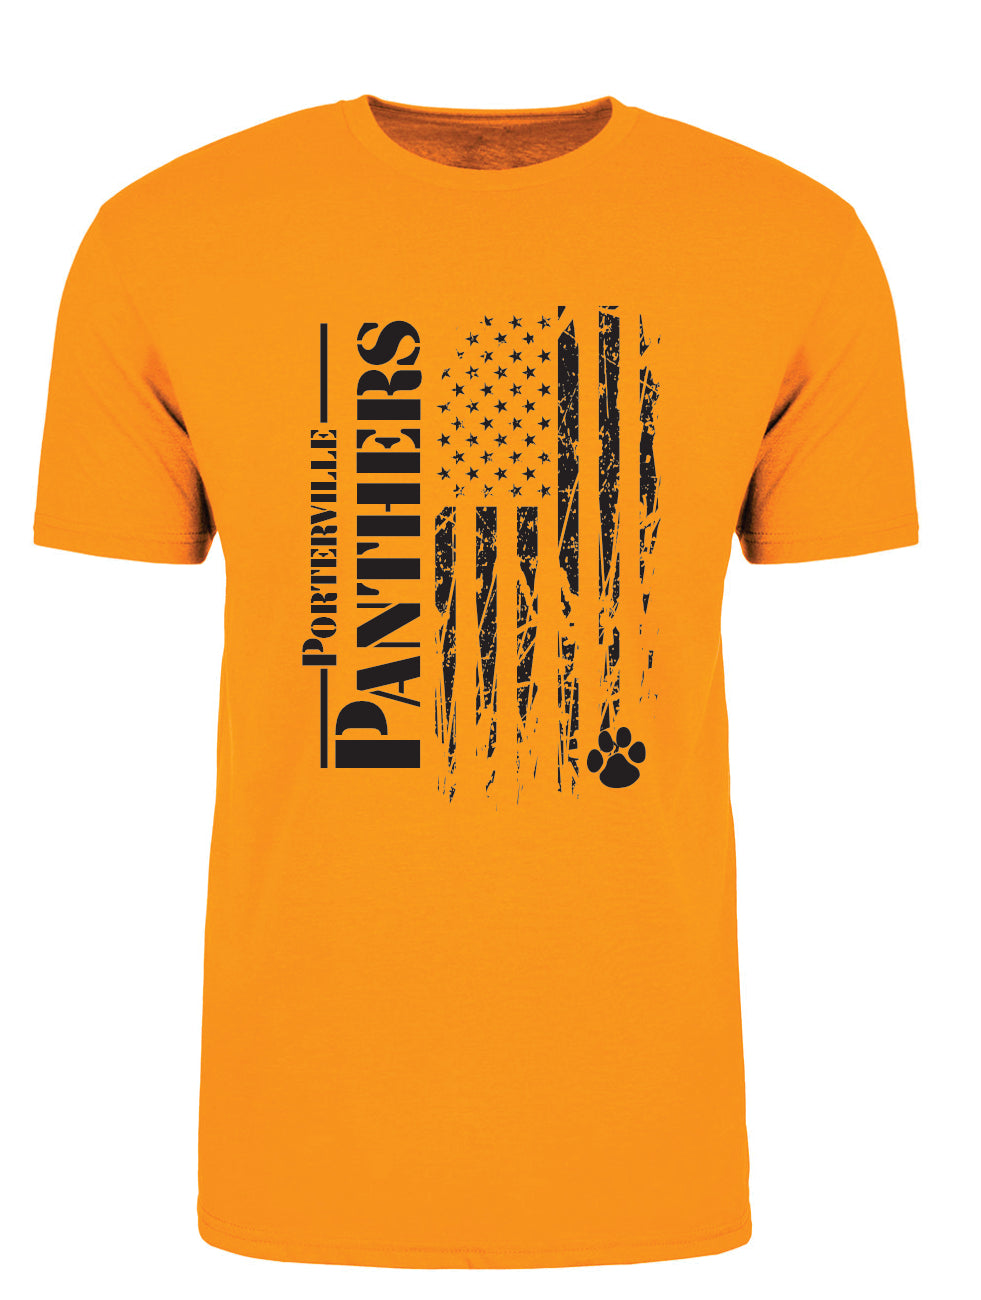 American Panthers T-shirt